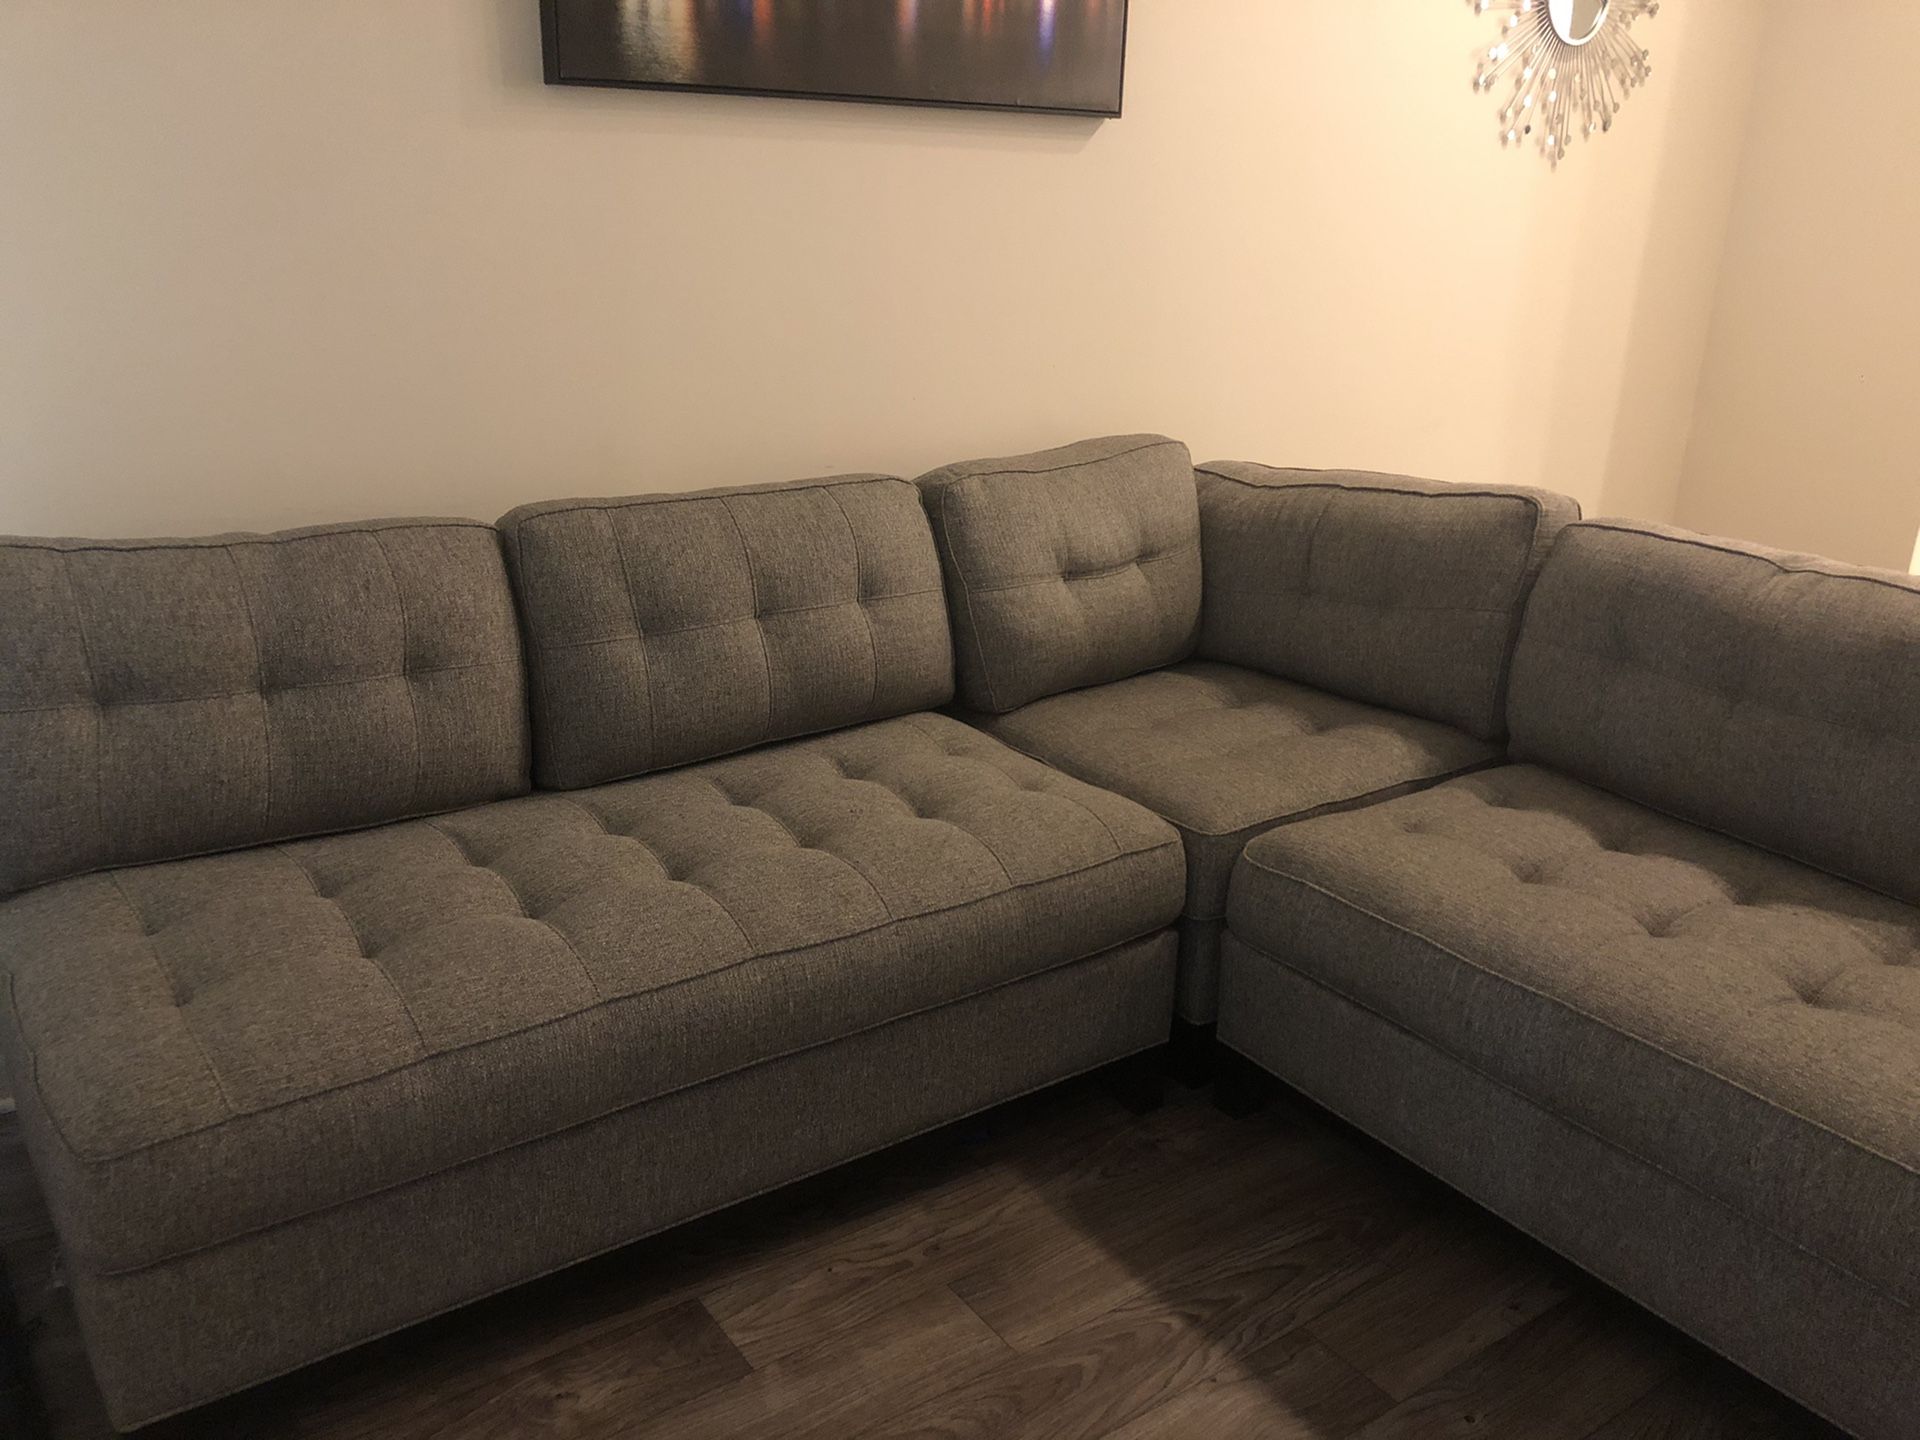 3 pc rooms to- go tufted SECTIONAL